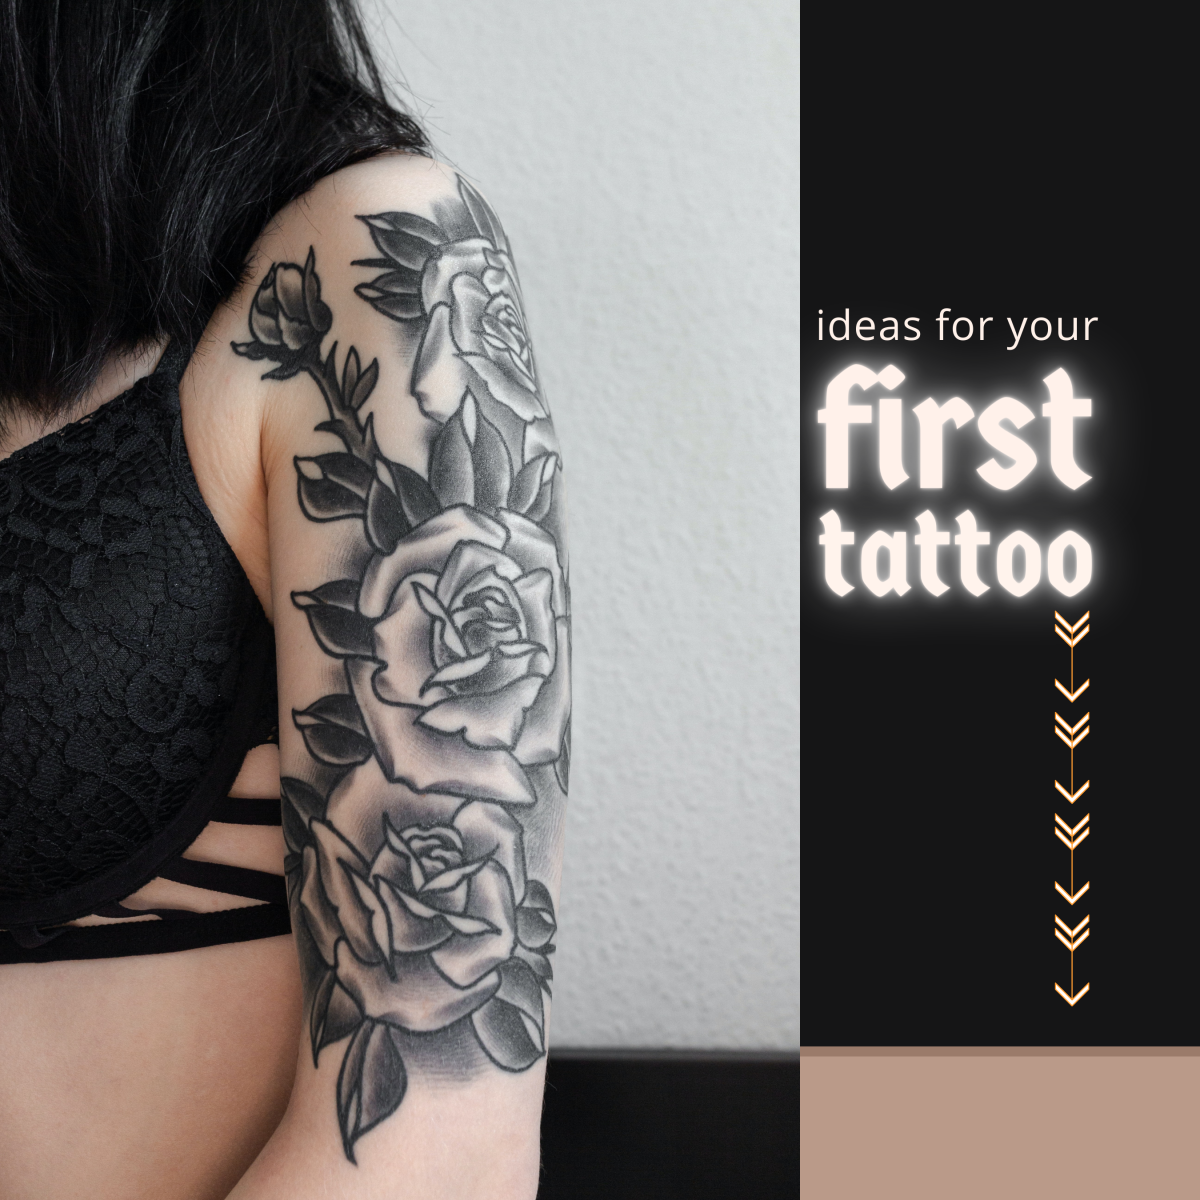 Great ideas and inspiration for your first tattoo.